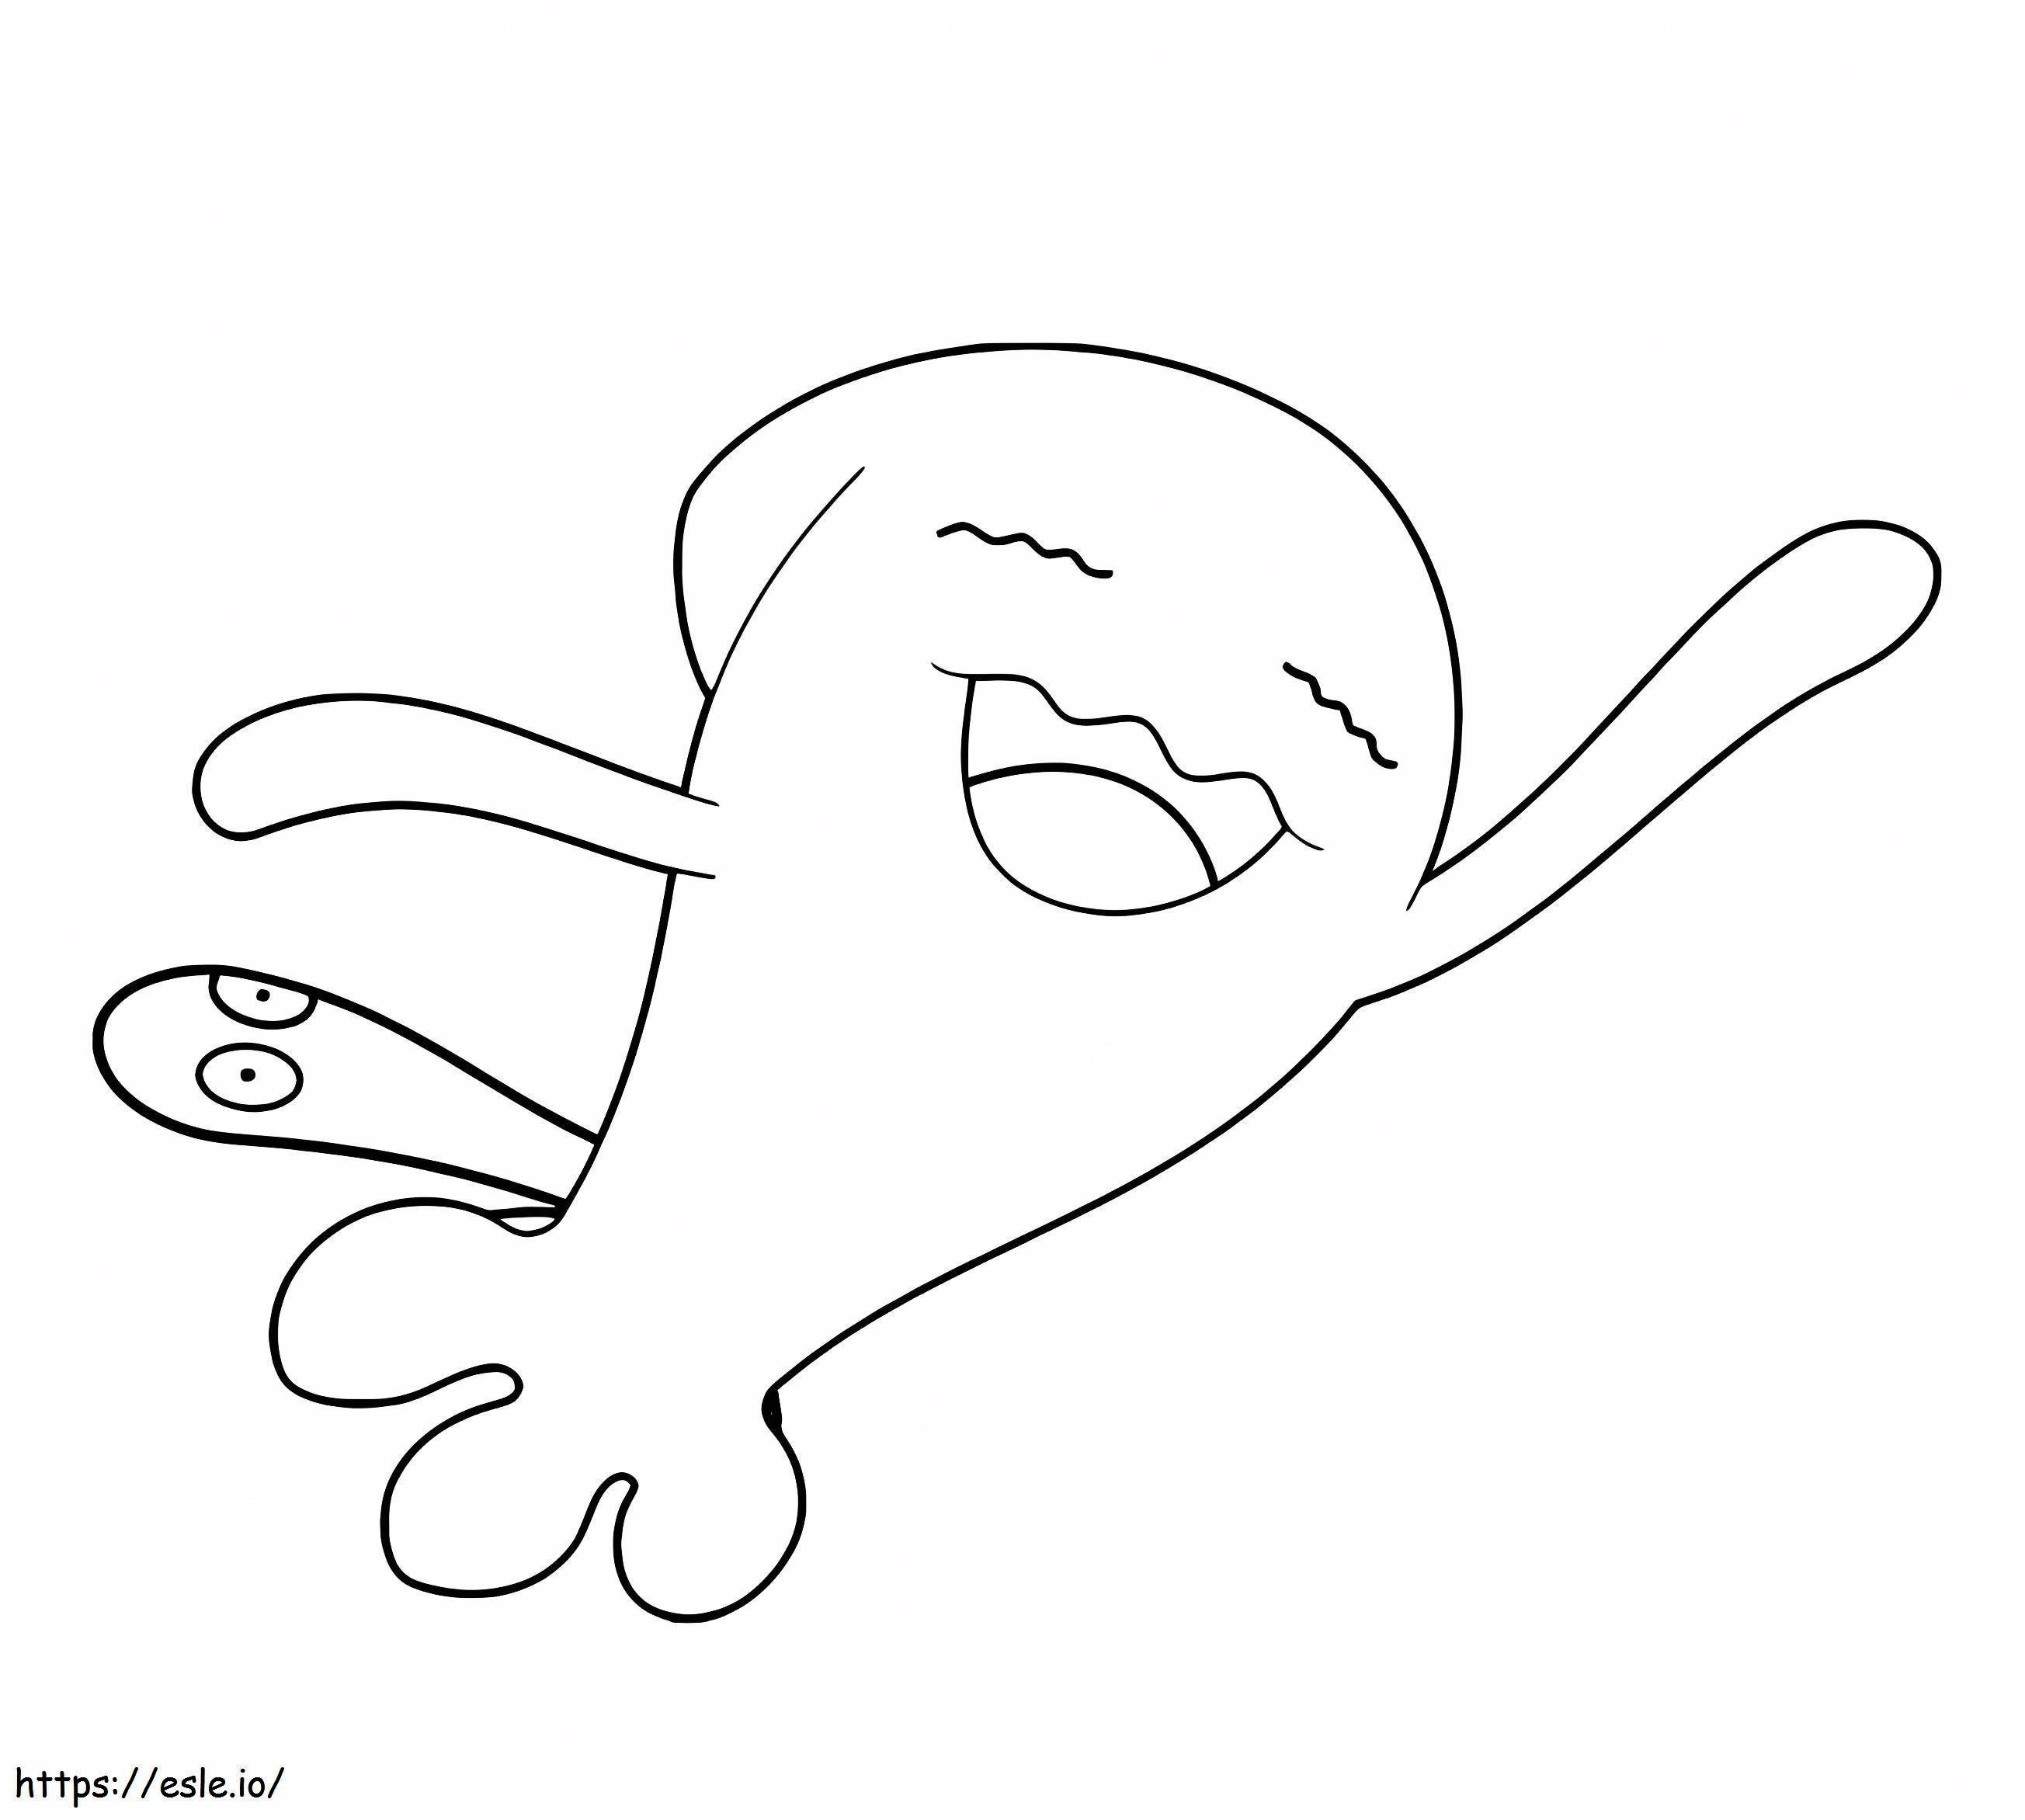 Wobbuffet 6 coloring page